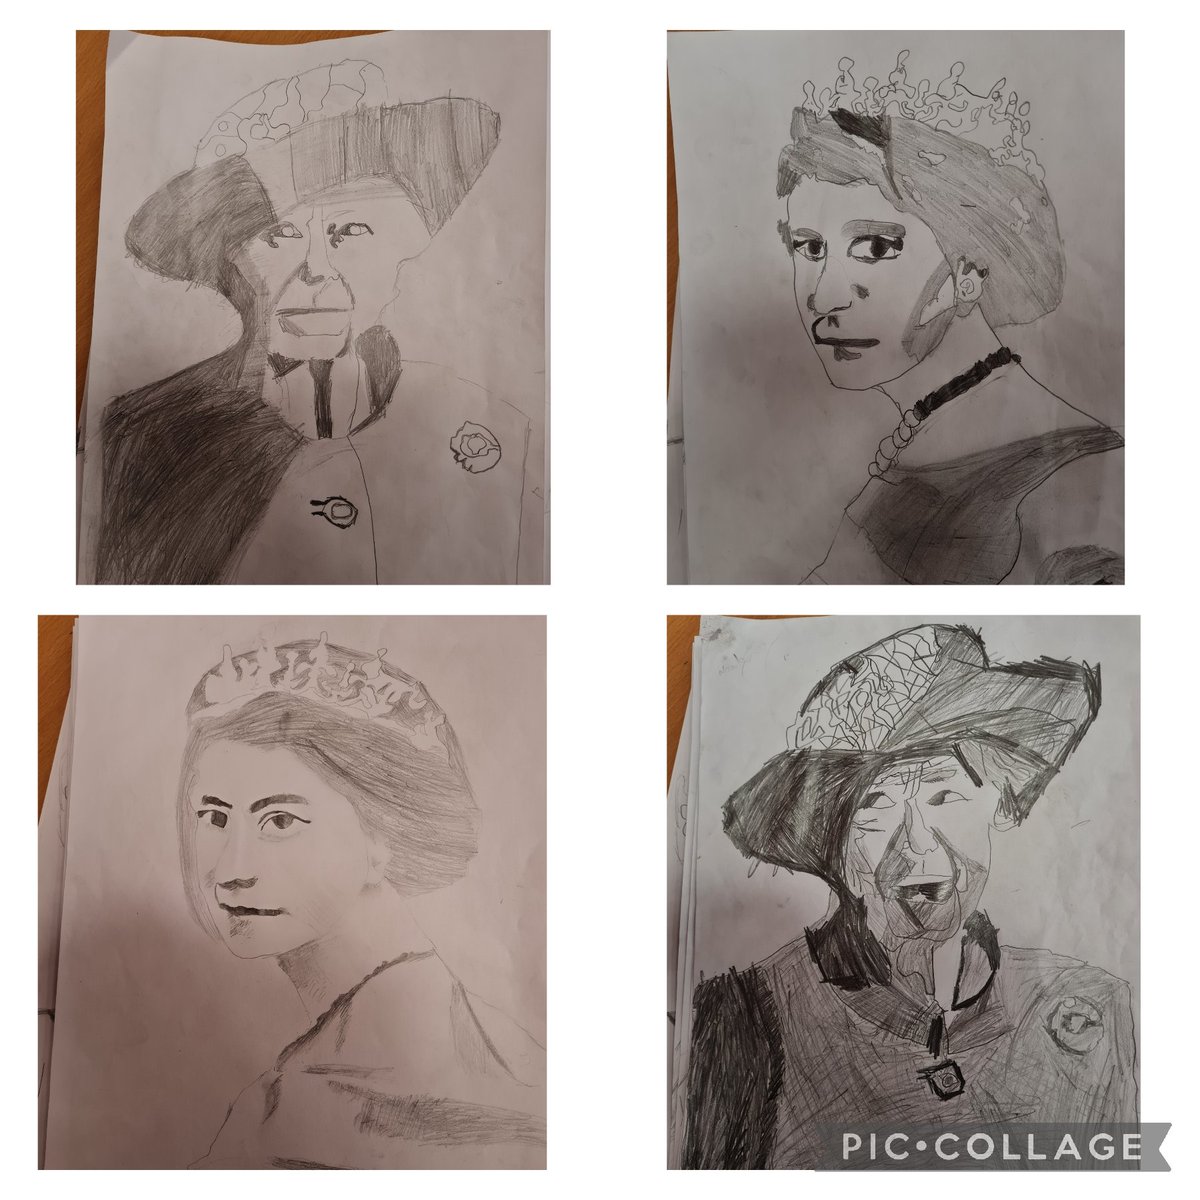 Could not be more proud of my learners' finished #JubileePortraits, they are phenomenal! So different but all instantly recognisable. A reminder that #SATsWeek success comes in all shapes and sizes 🙃
#KeyStage2
#edutwitter #art 
#ArtInSchool